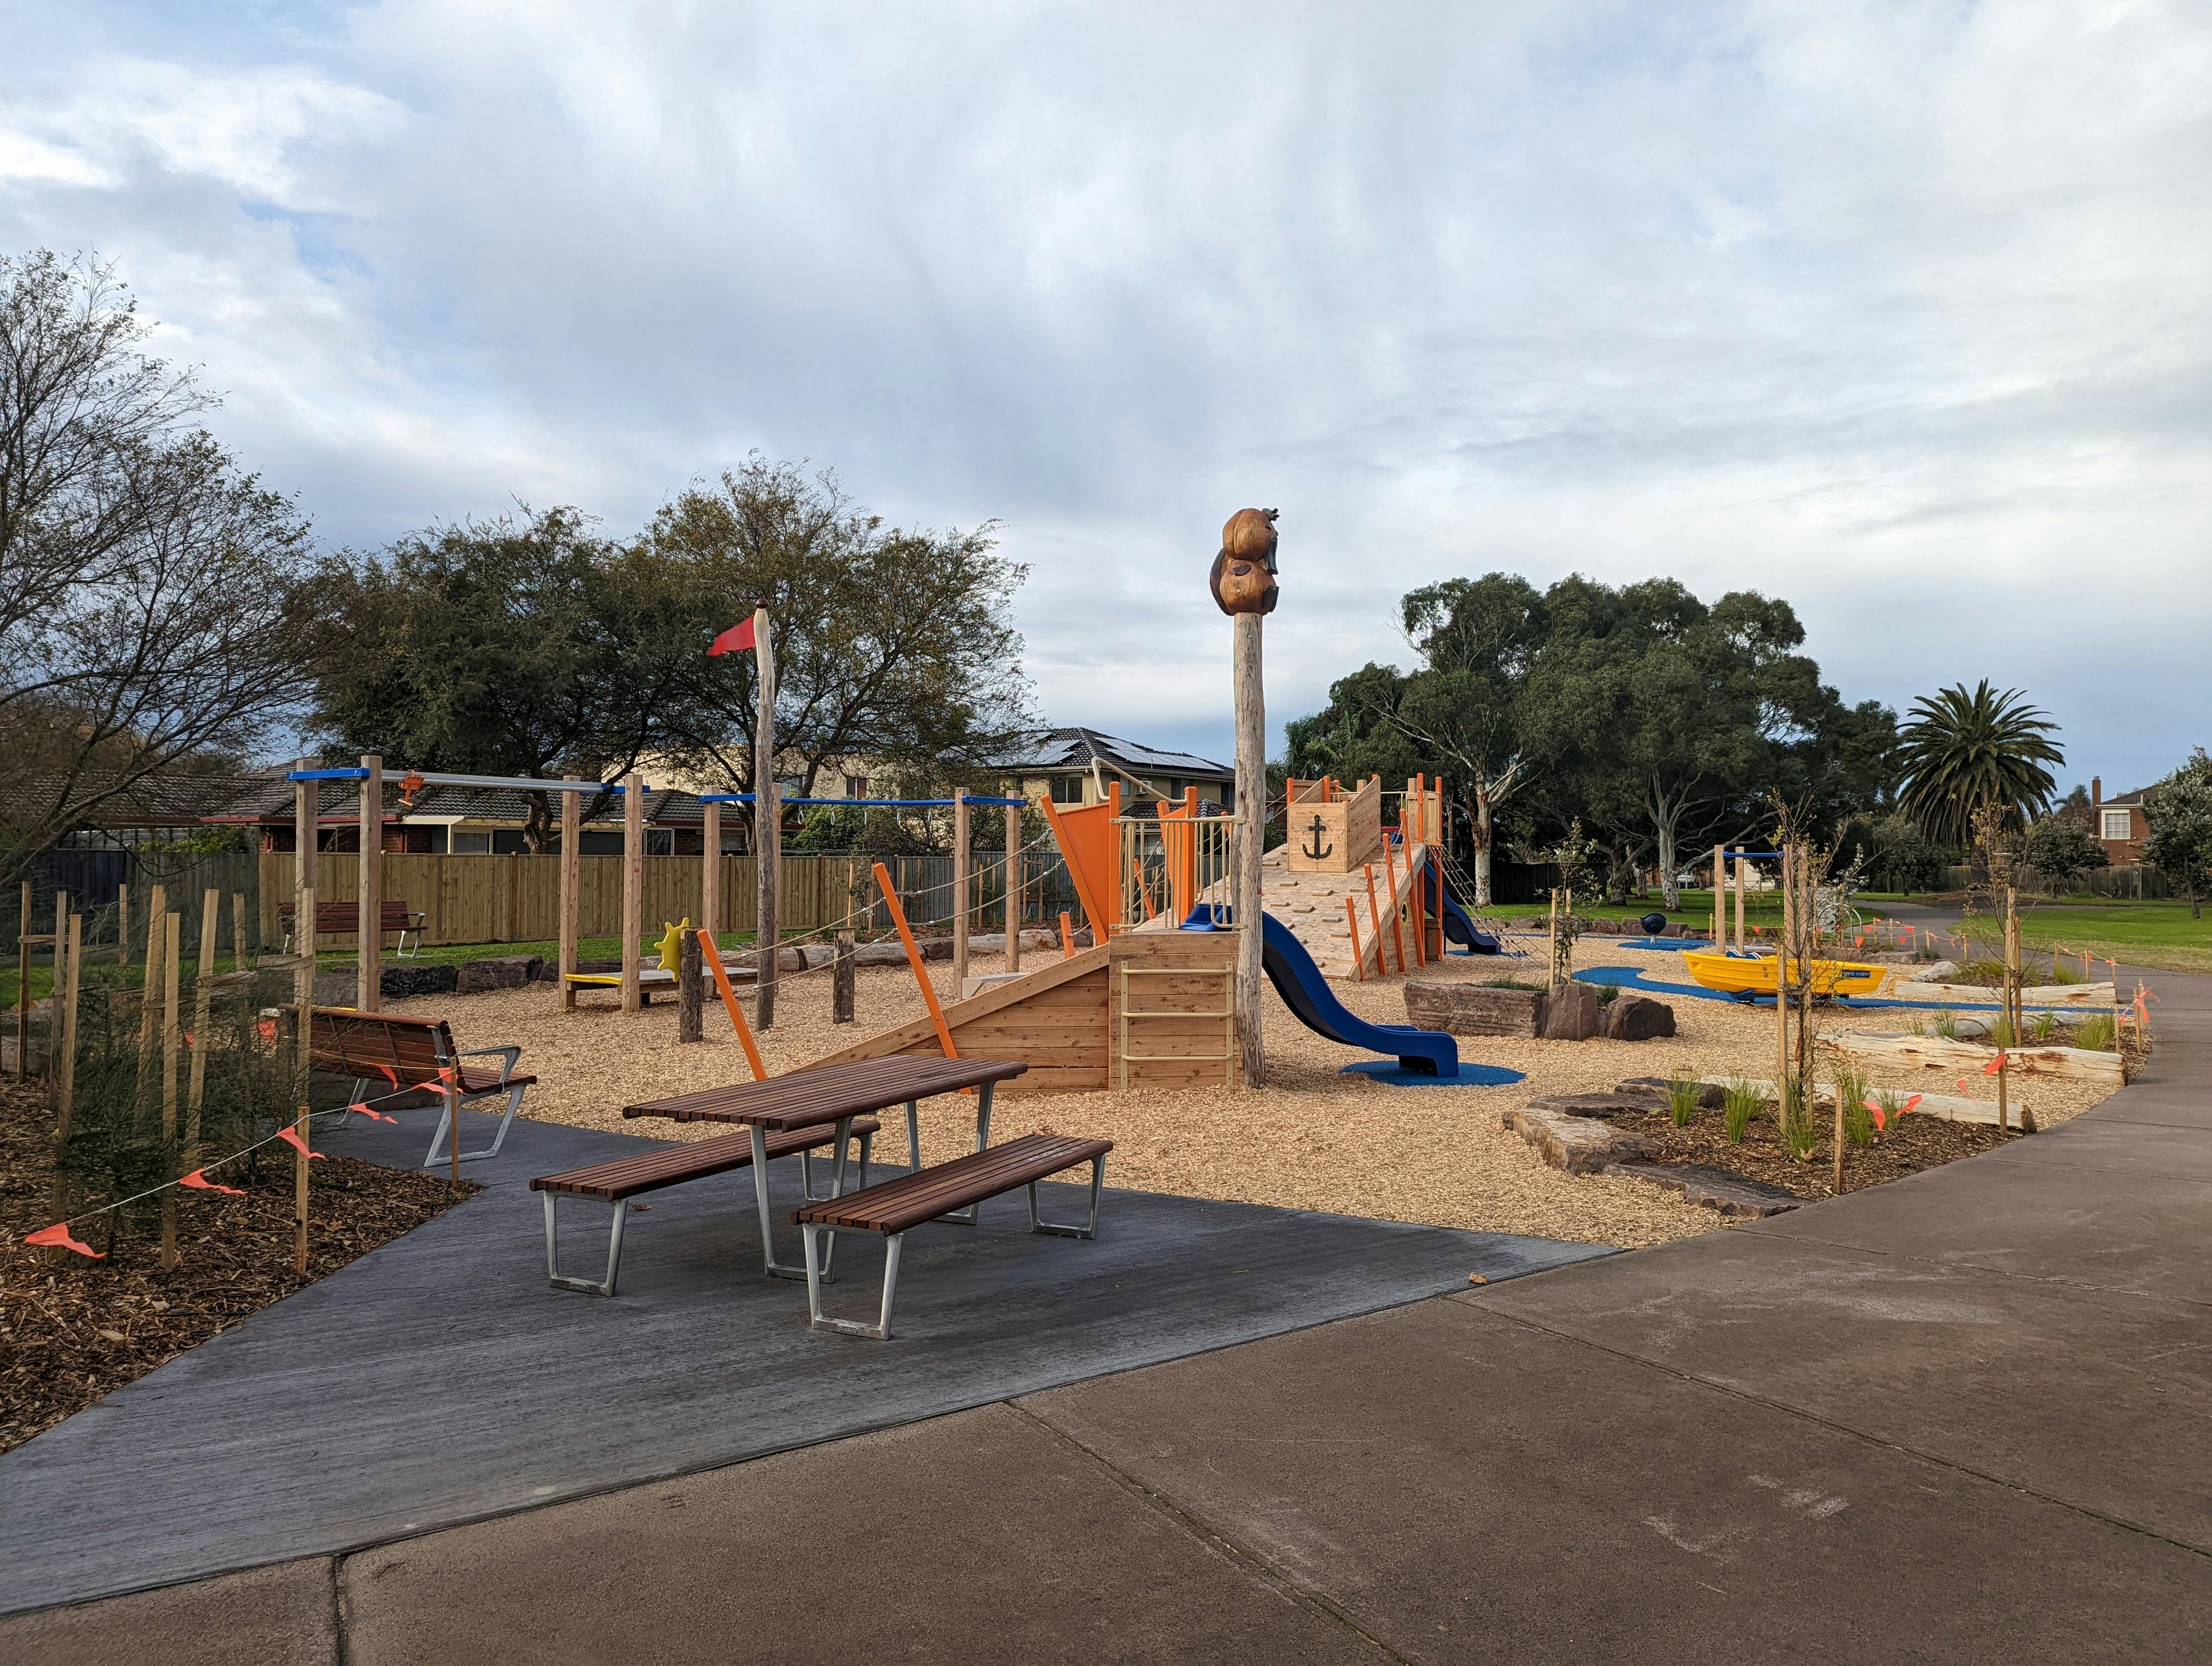 Local - Harbour Town Playground, Patterson Lakes.jpg